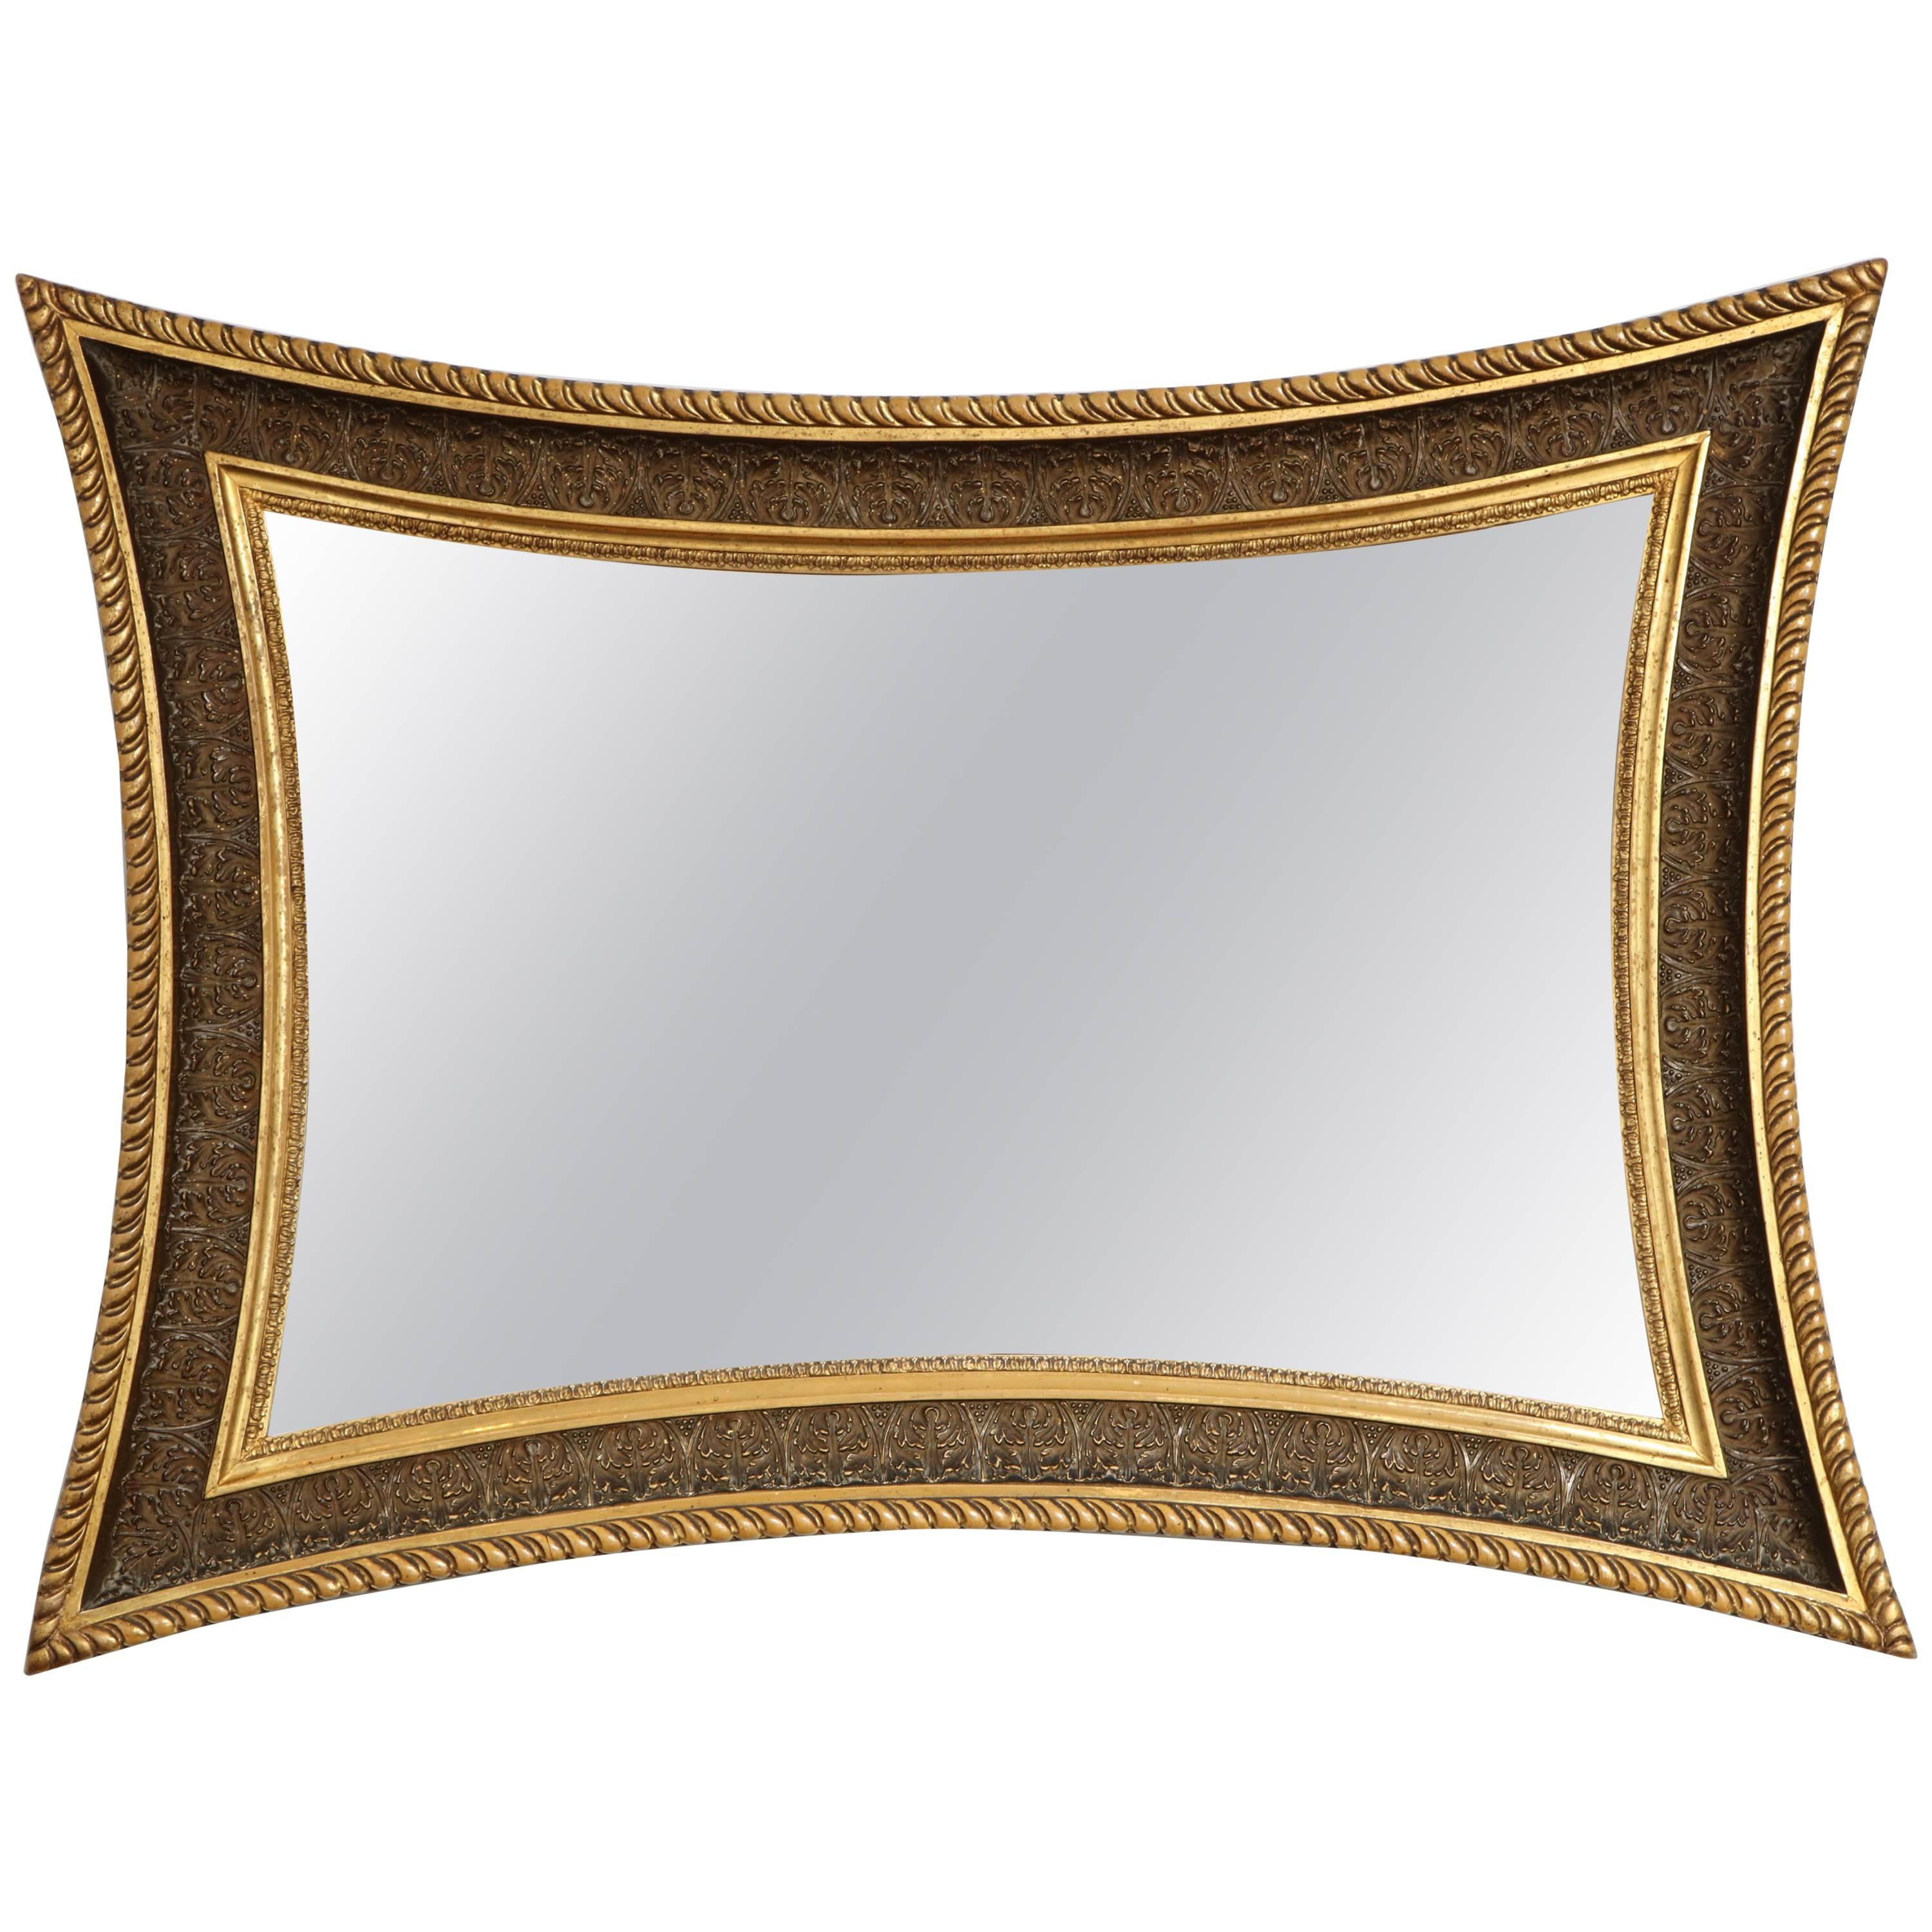 Danish Giltwood and Painted Concave Sided Mirror, circa 1860s